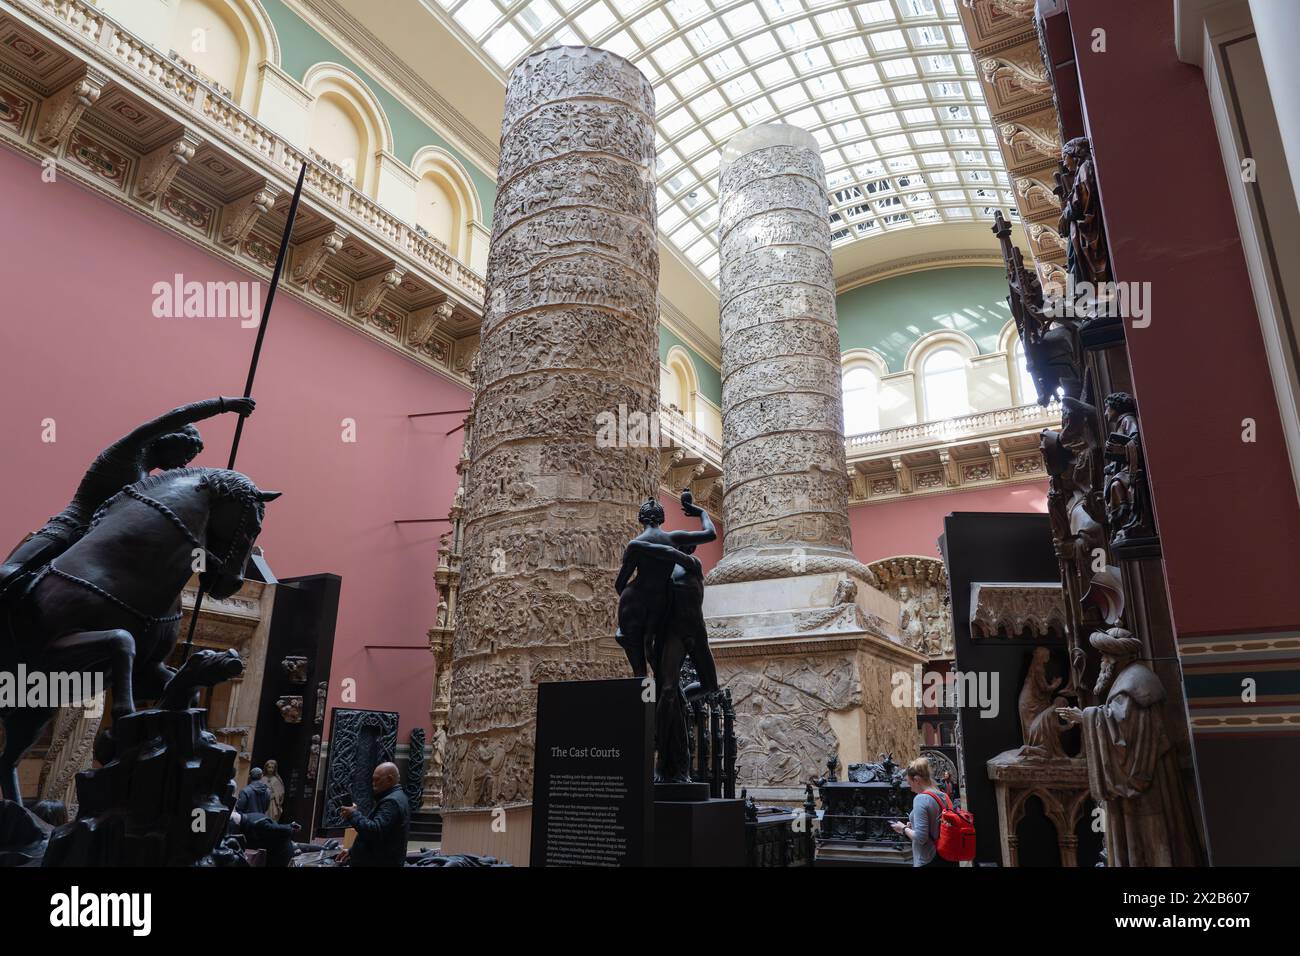 The magnificent plaster cast of Trajan's Column is one of the stars of the V&A museum collection and towers over the cast courts in two halves. London Stock Photo